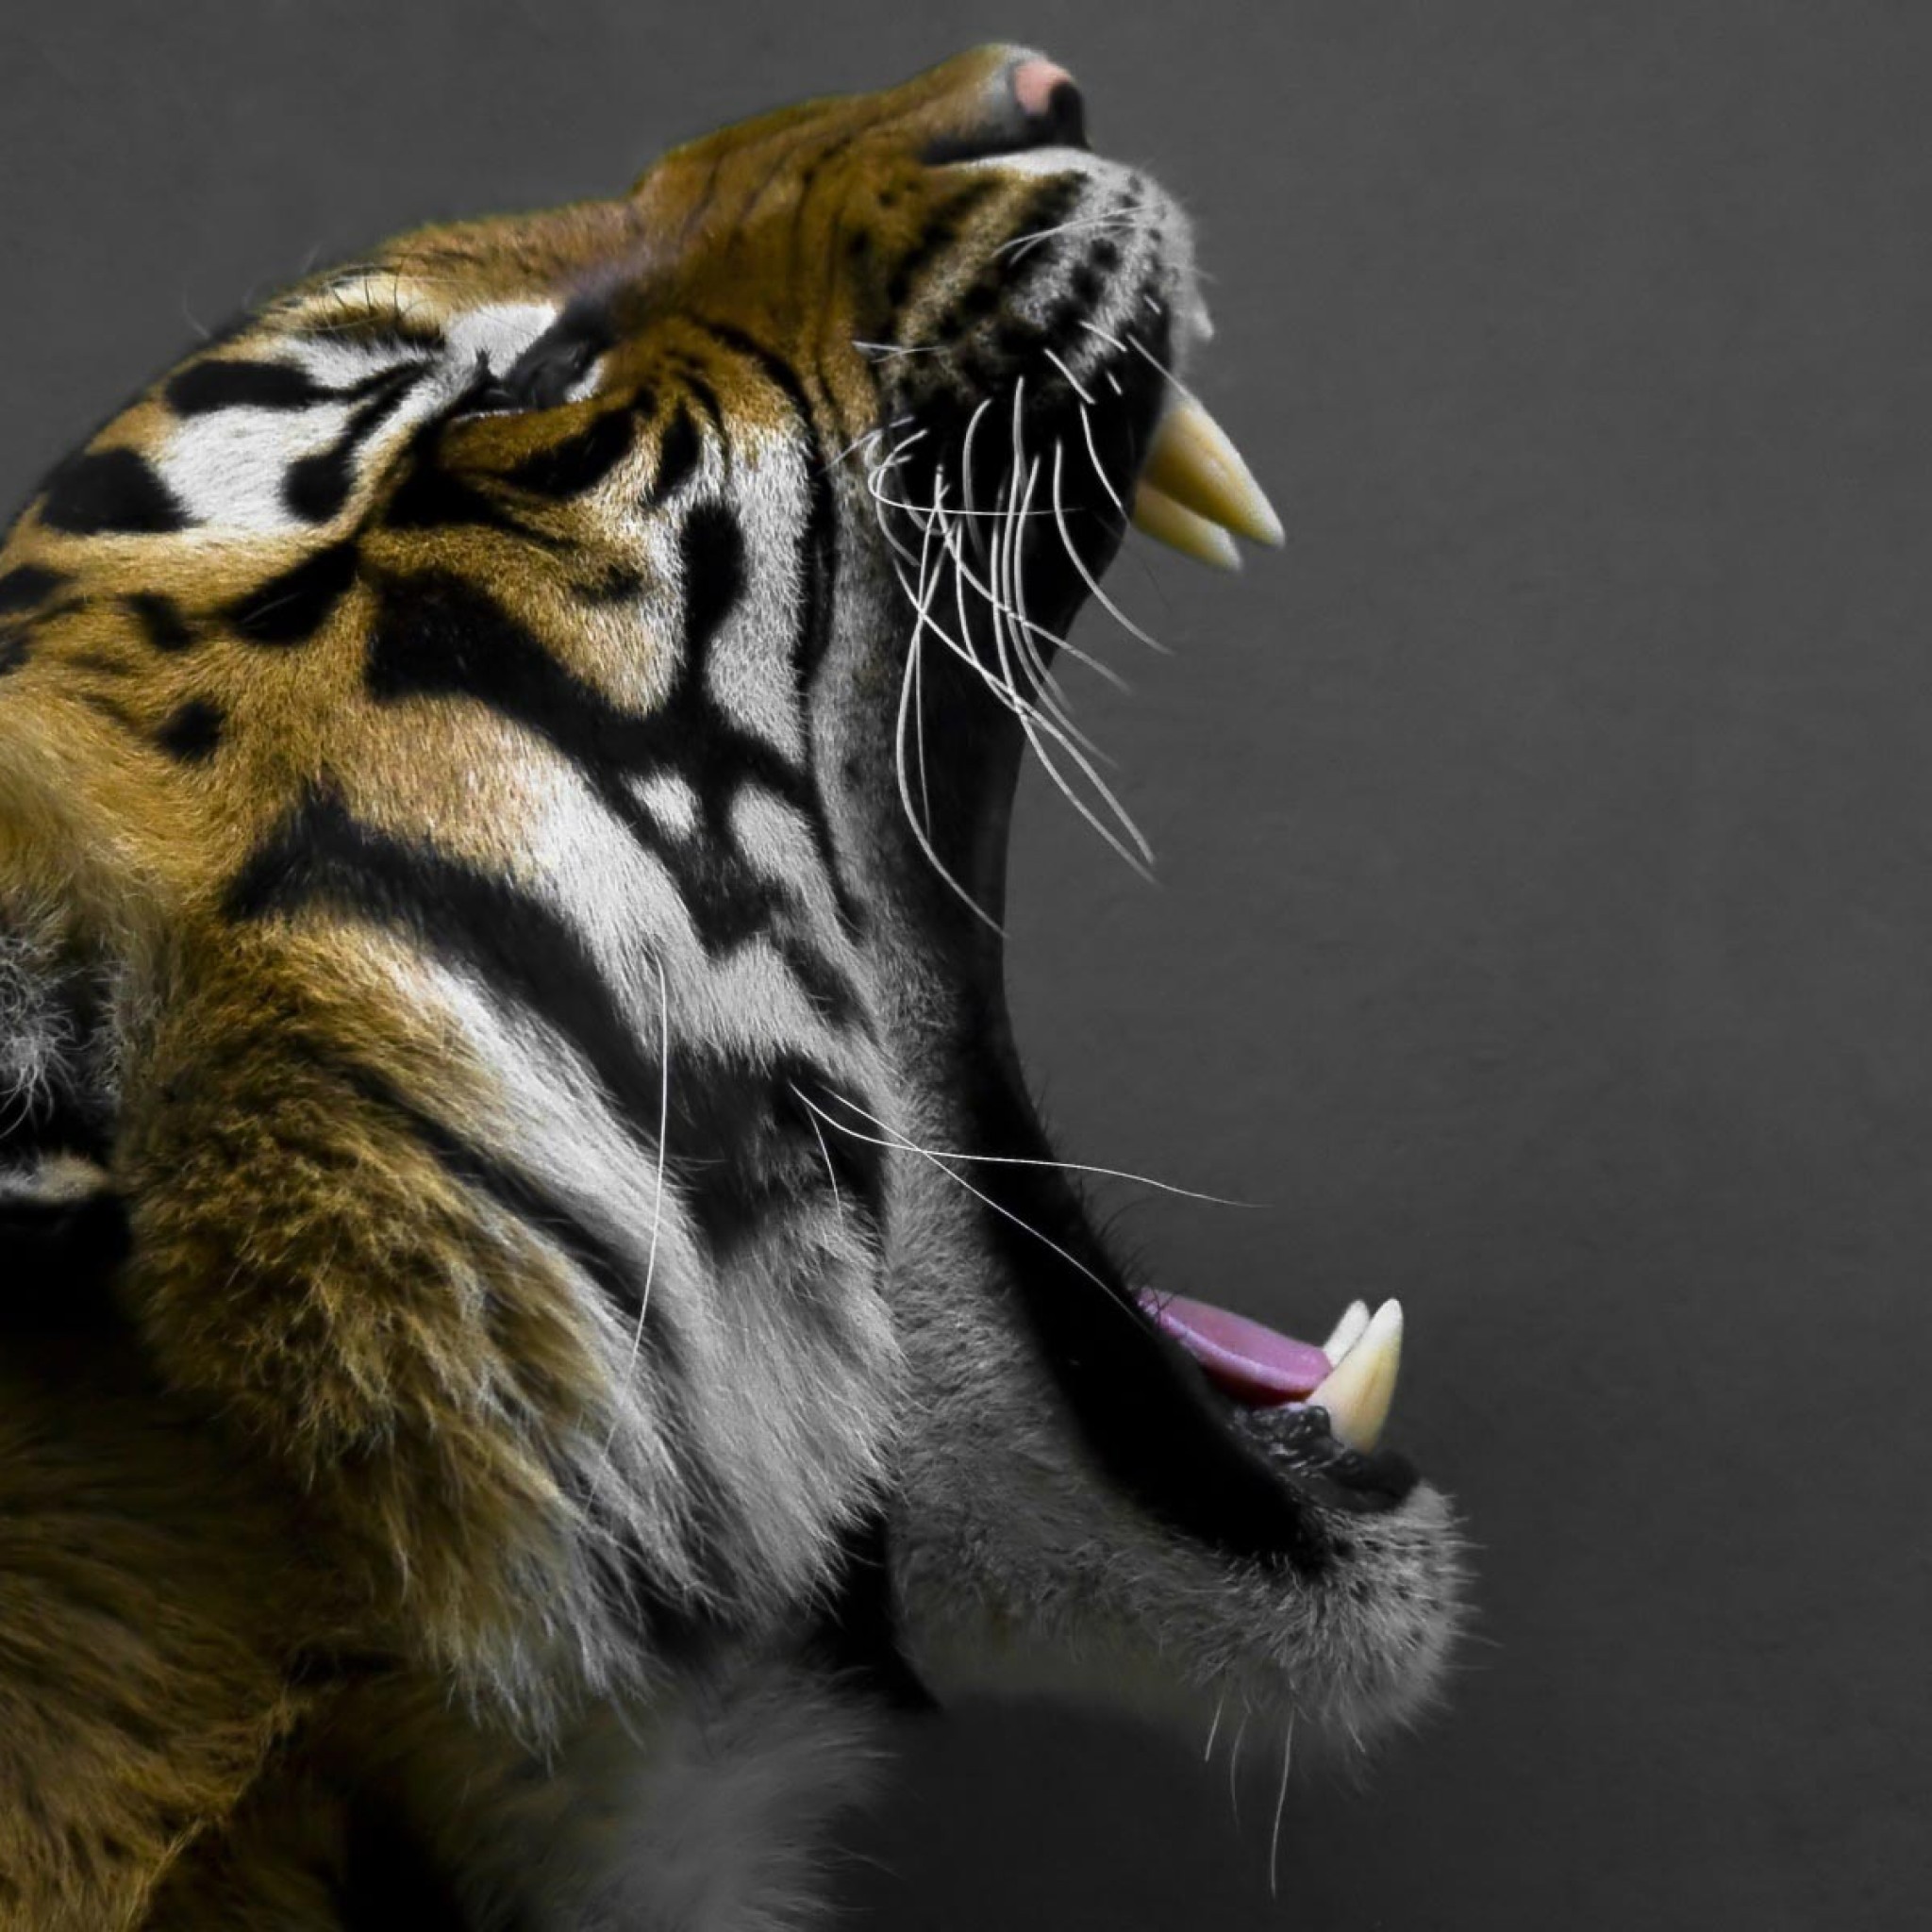 Tiger Open Mouth Side View - HD Wallpaper 